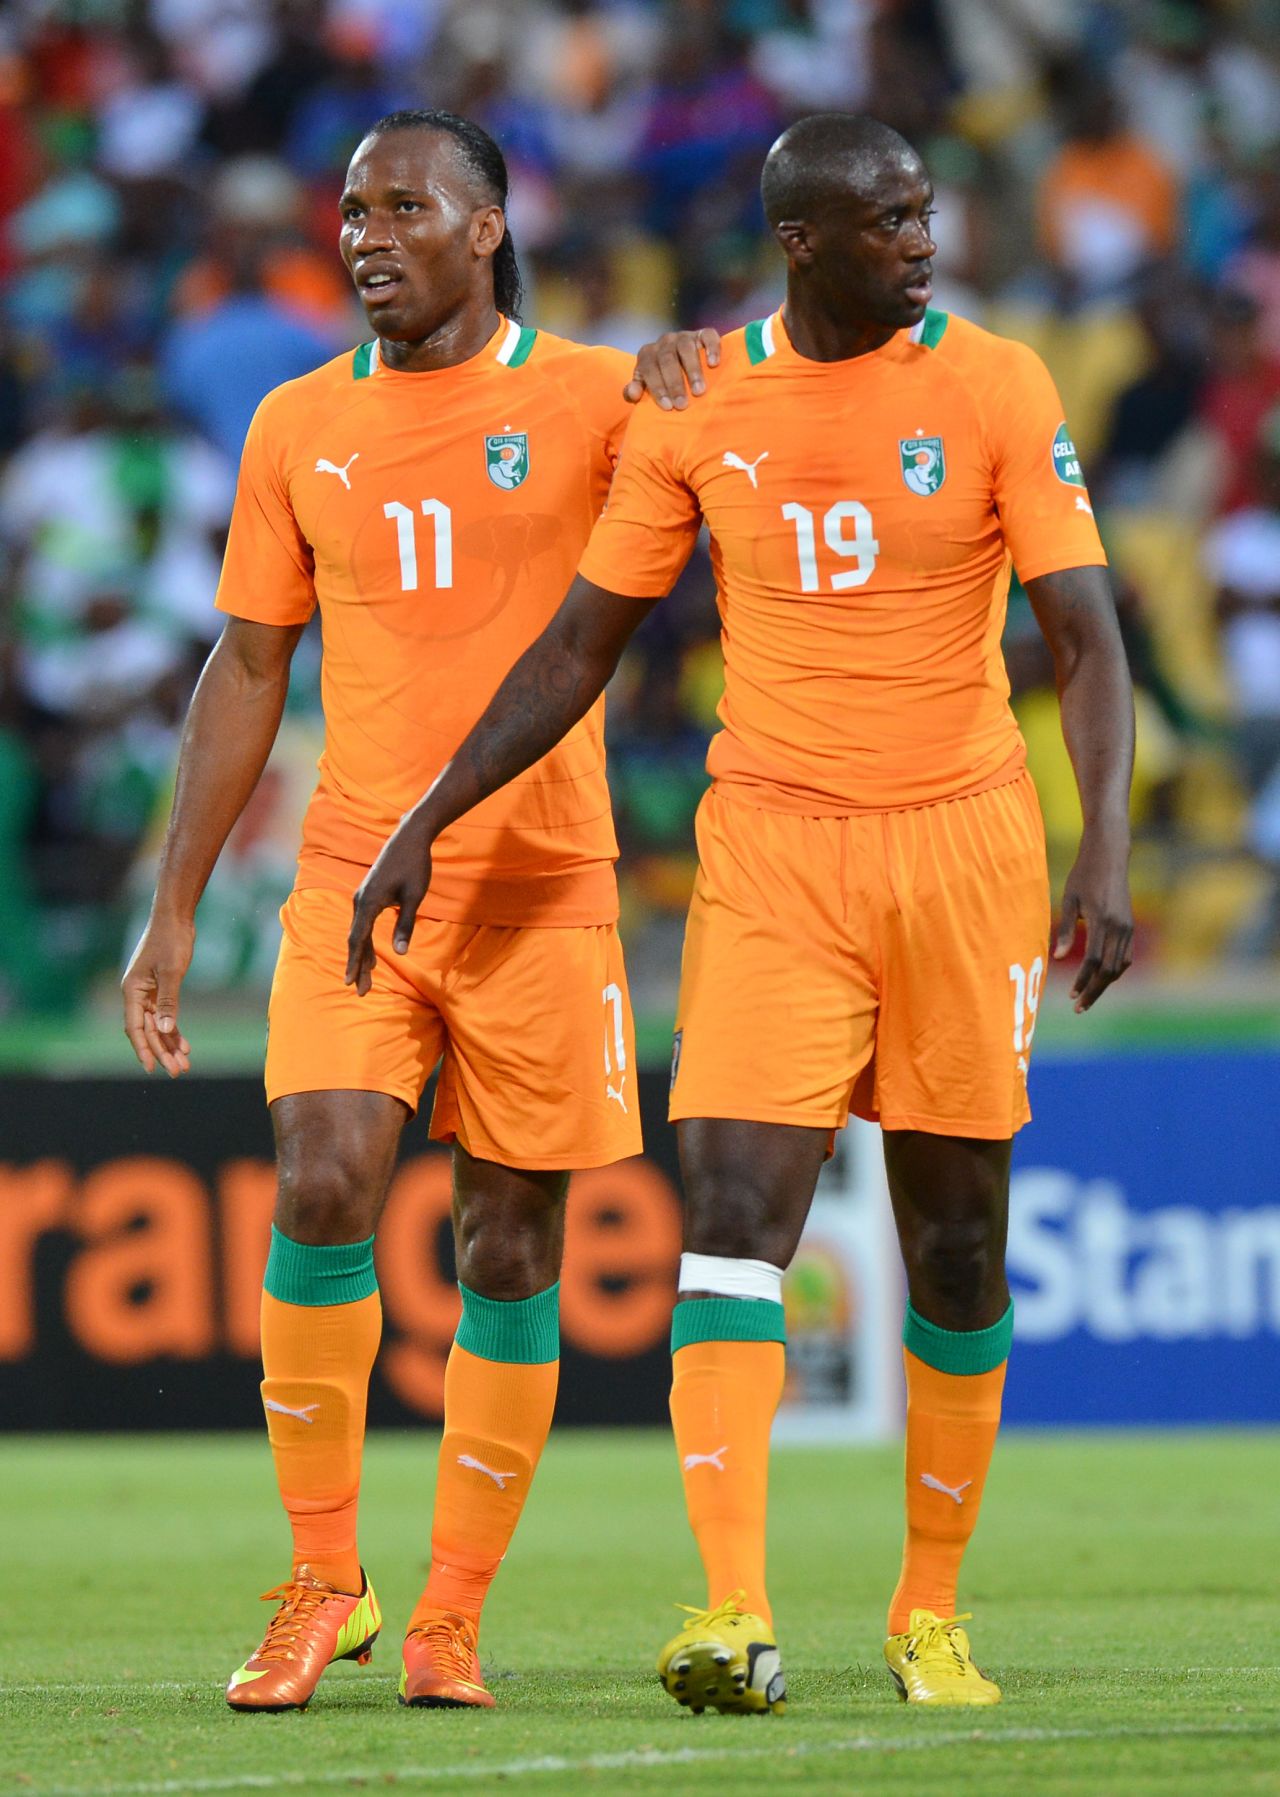 Like Eto'o, Ivory Coast stars Didier Drogba (L) and Yaya Toure had a less than memorable World Cup in South Africa four years ago.